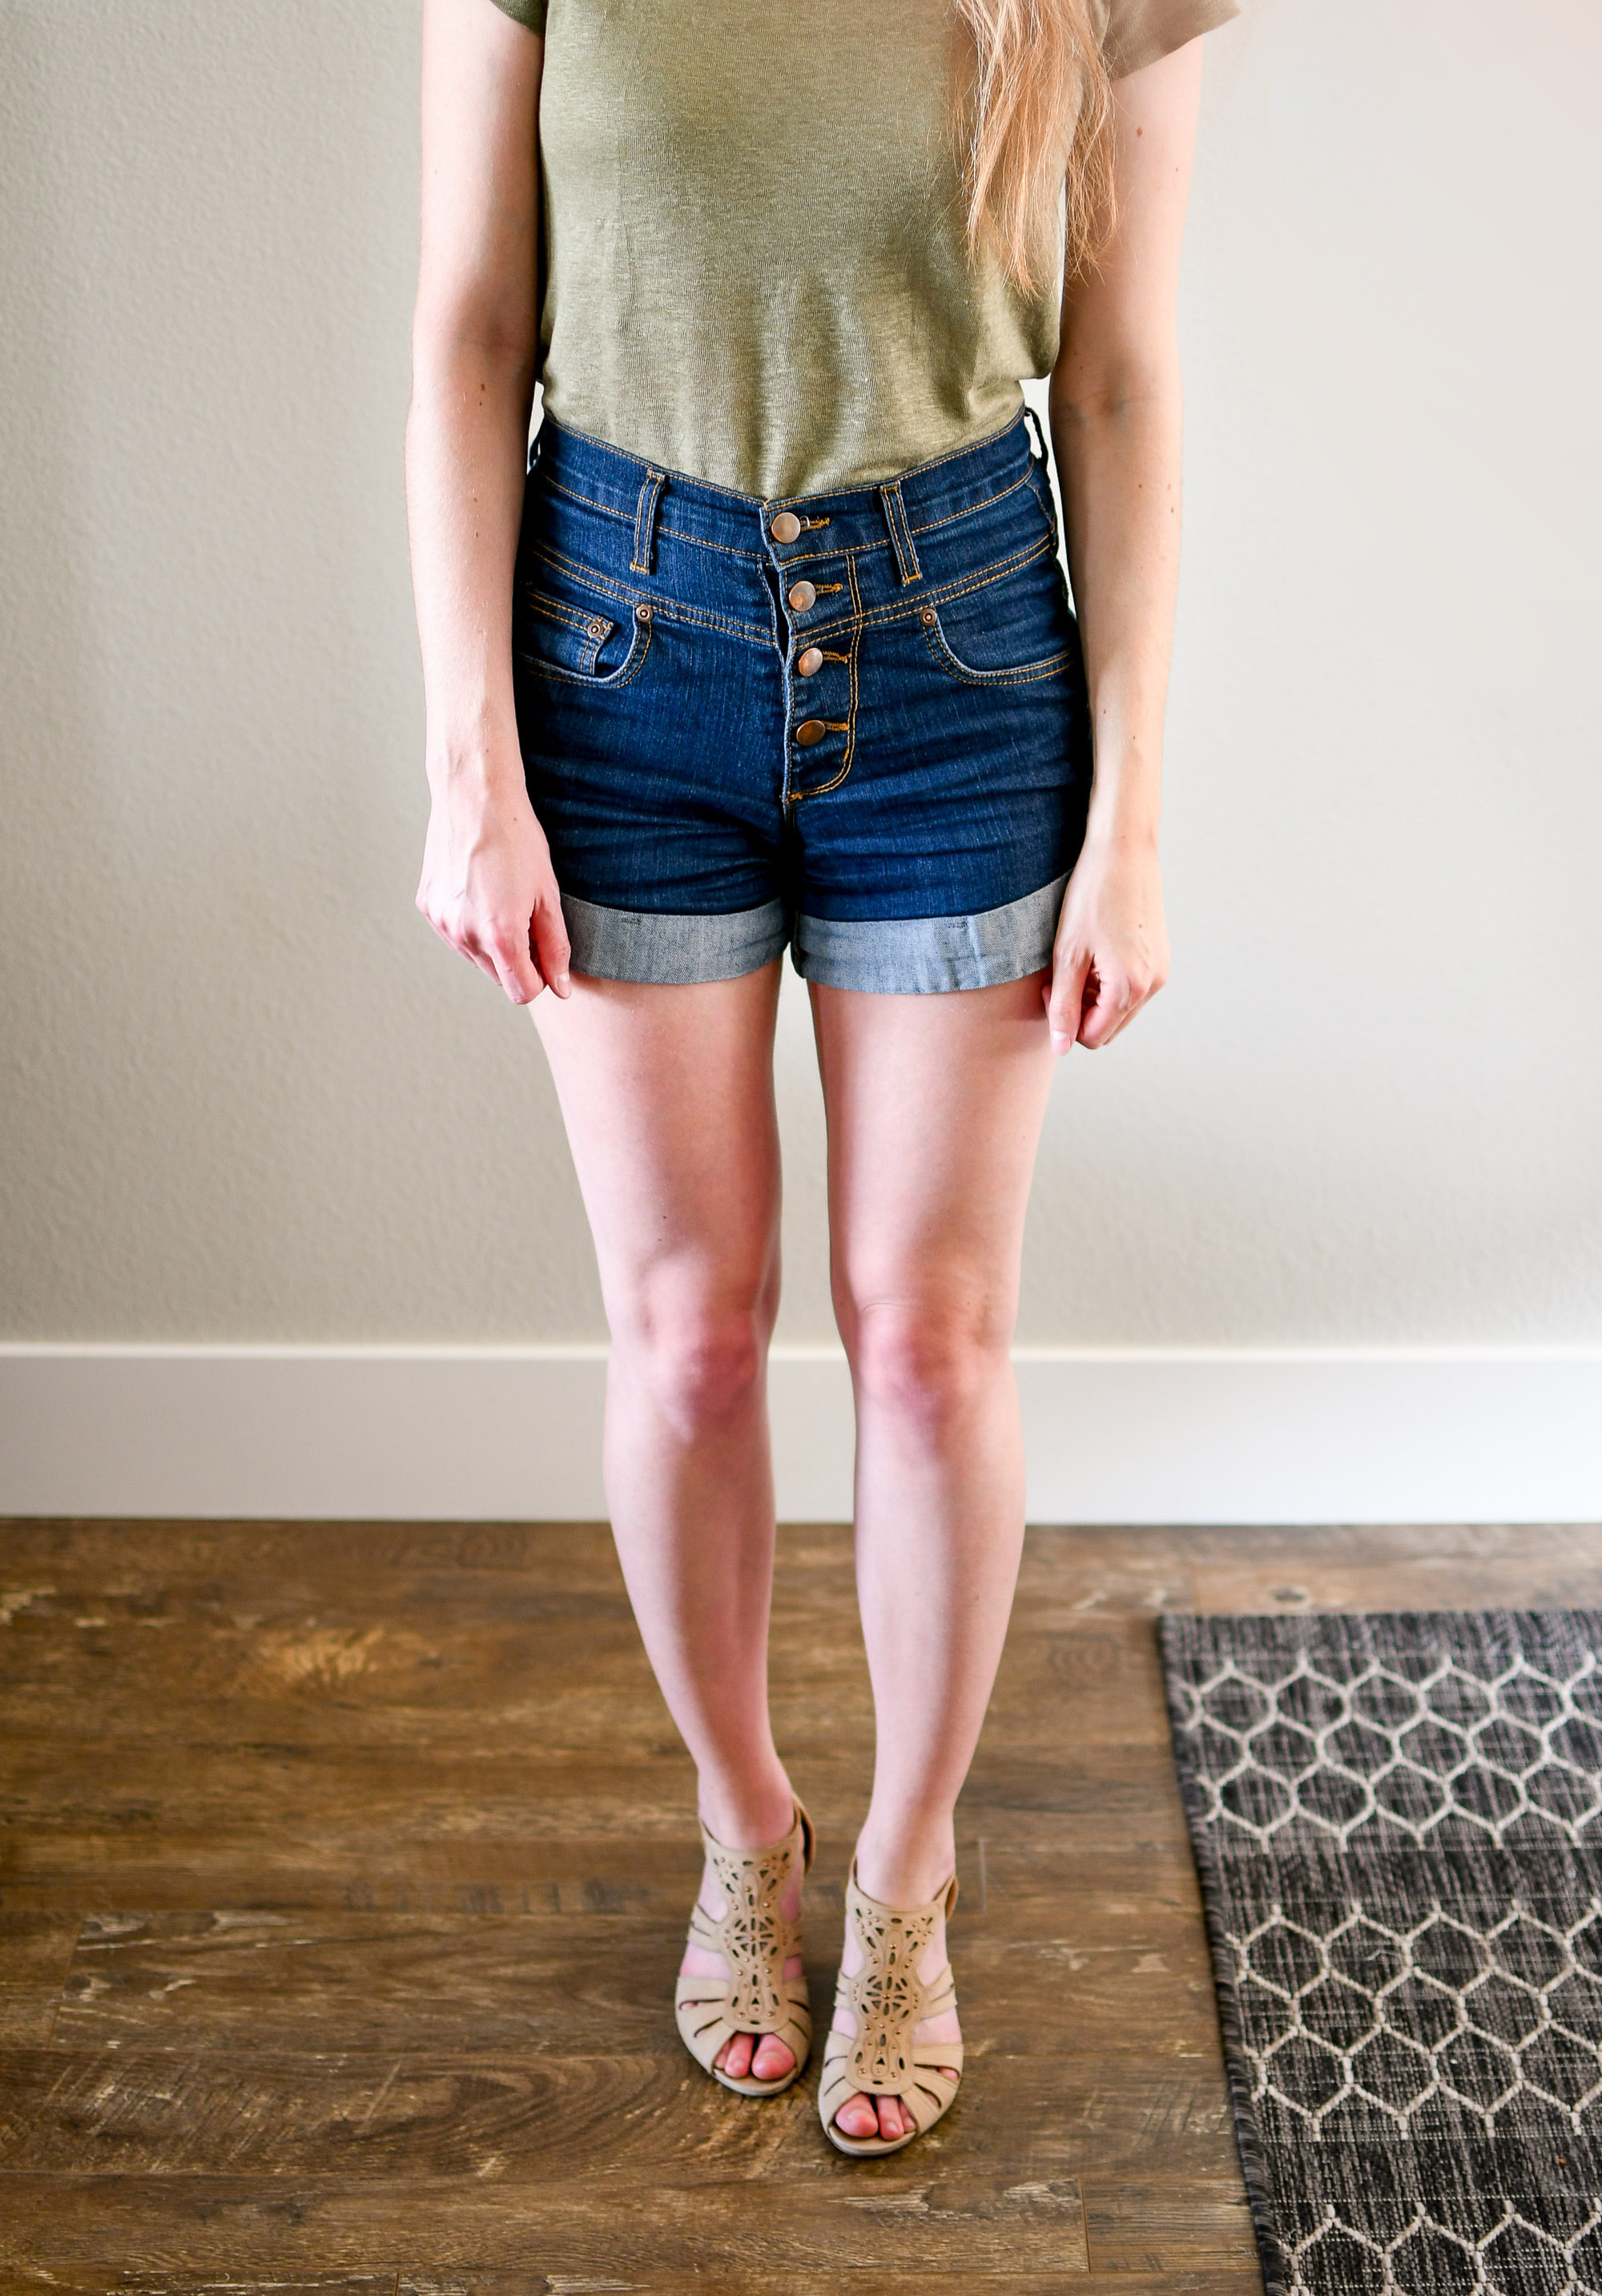 Denim shorts casual summer outfit with beige wedge sandals — Cotton Cashmere Cat Hair